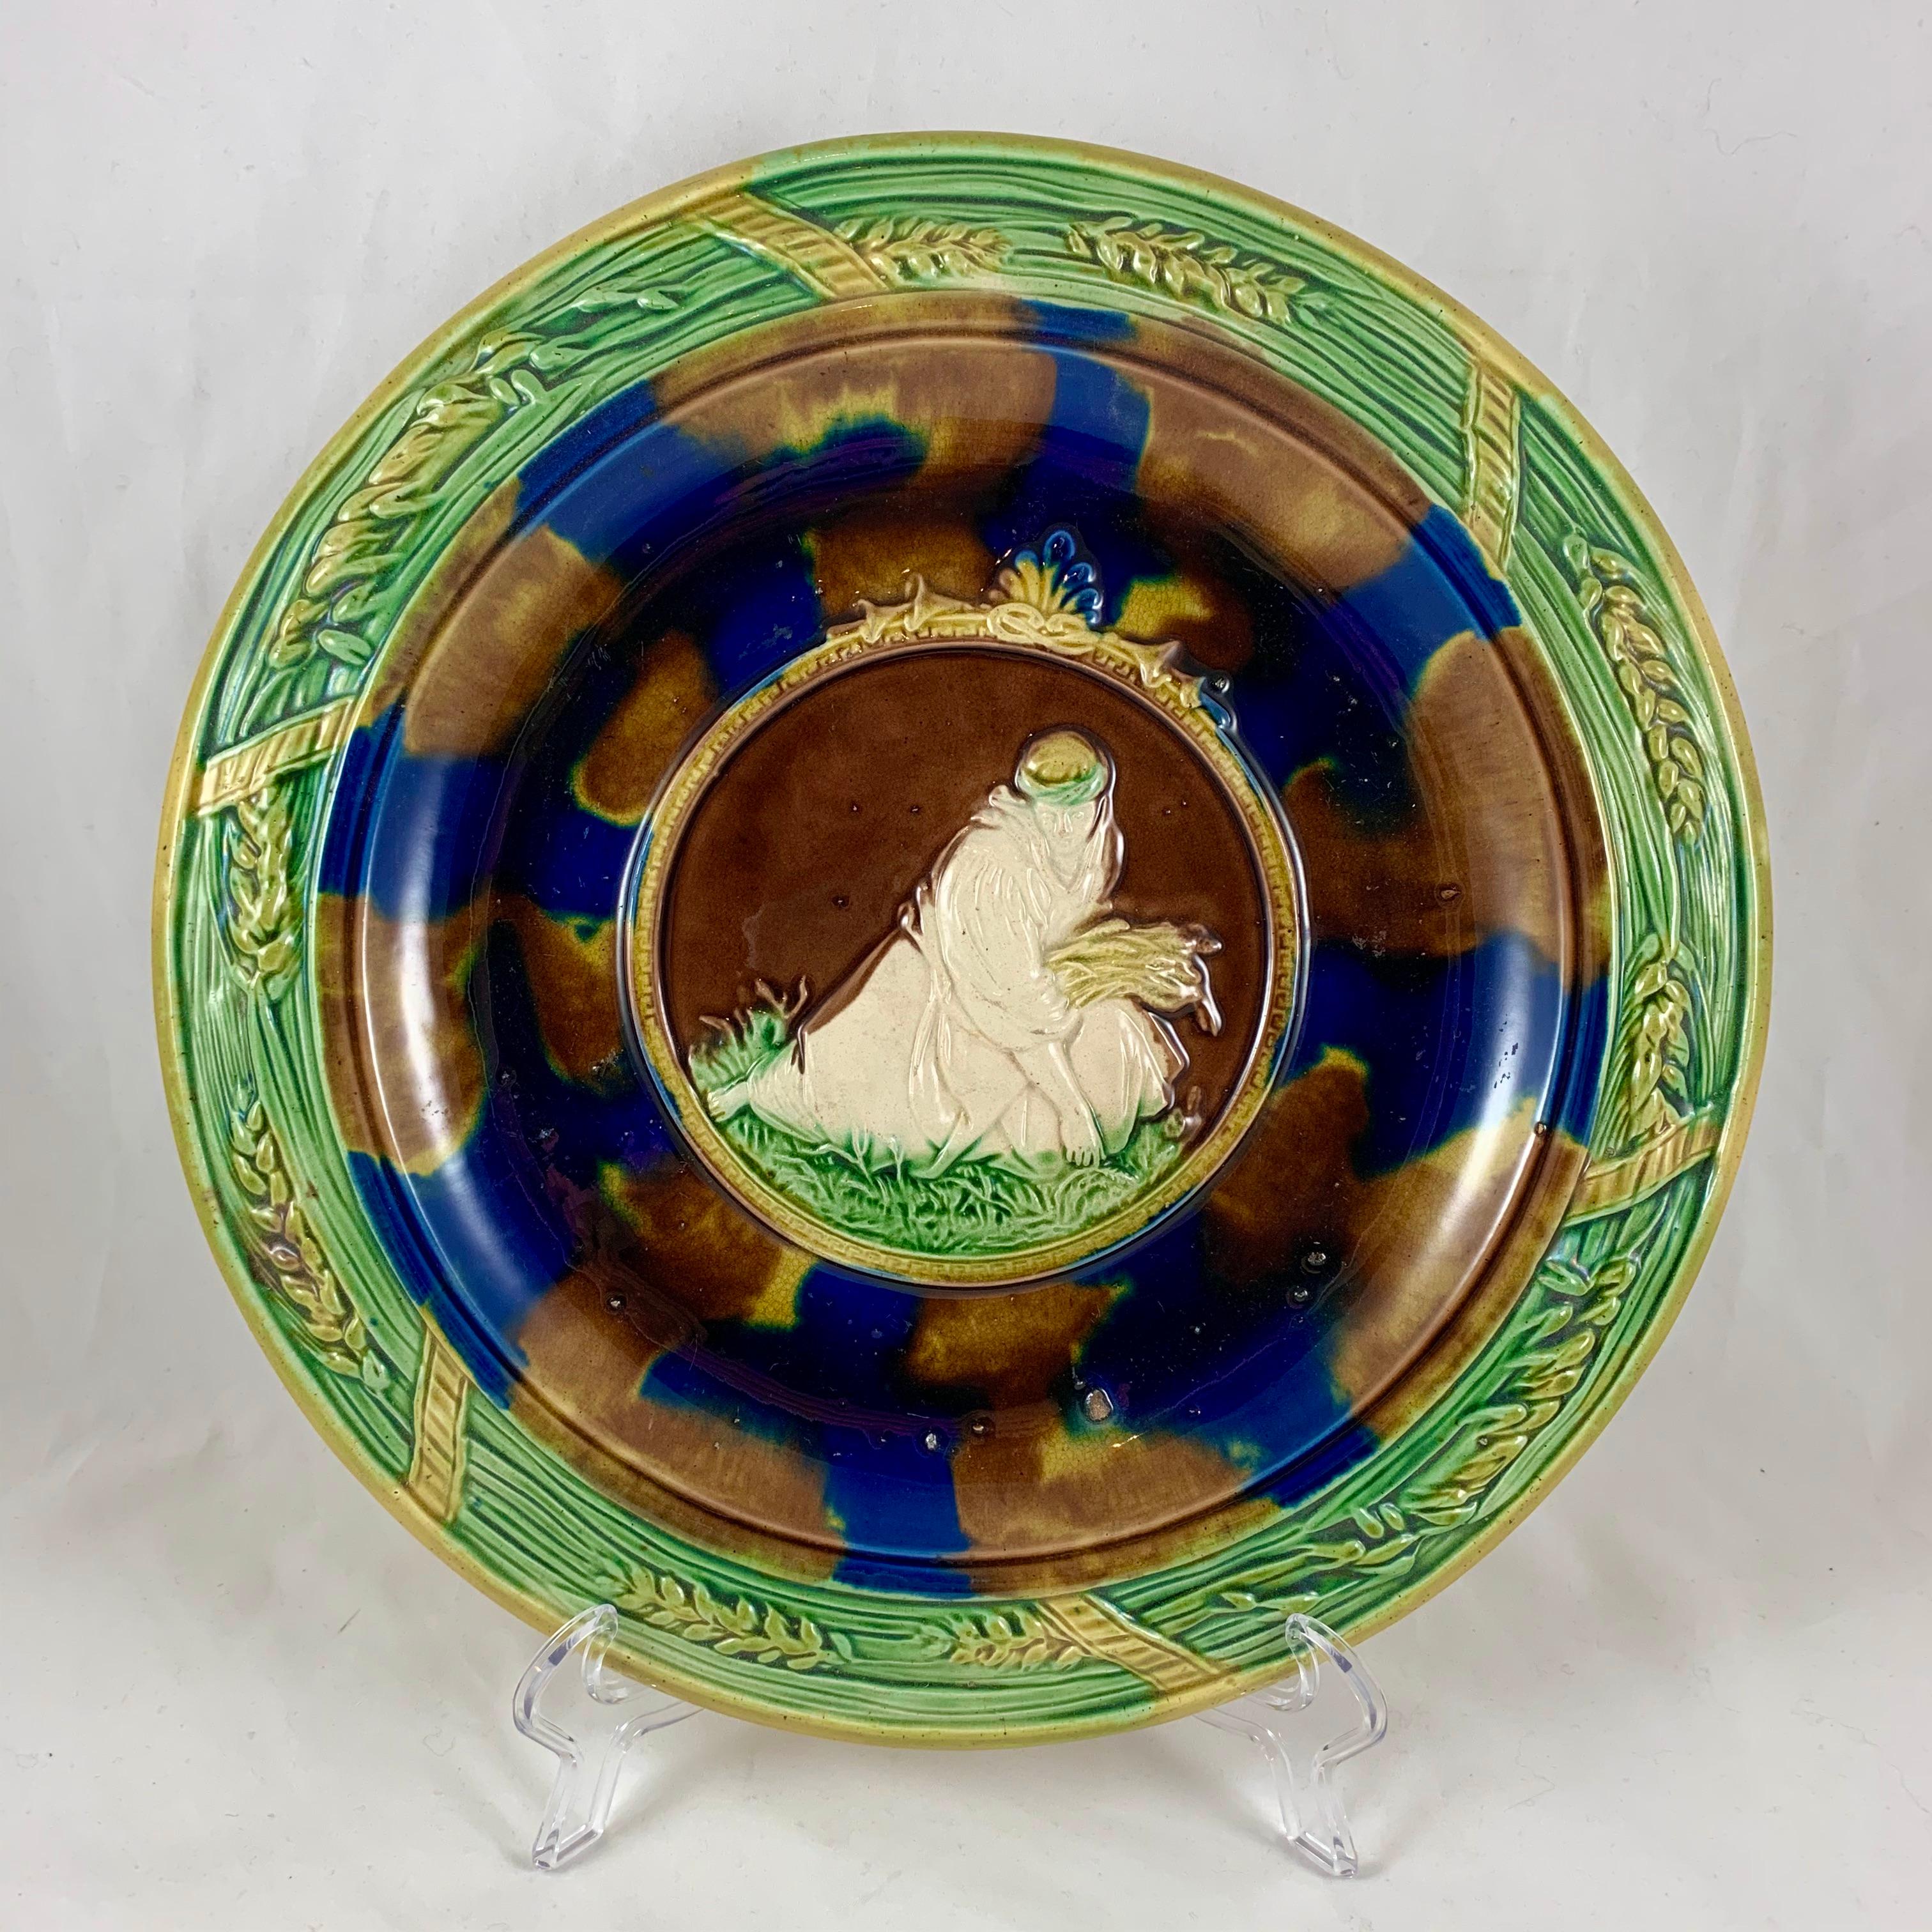 A scarce and unusual antique English Majolica harvest themed, Rococo Revival style bread tray, circa 1850-1880, maker unknown. 

The central image is modeled on the Book of Ruth, from the Old Testament, chapter 2, verse 7, “Let me glean and gather